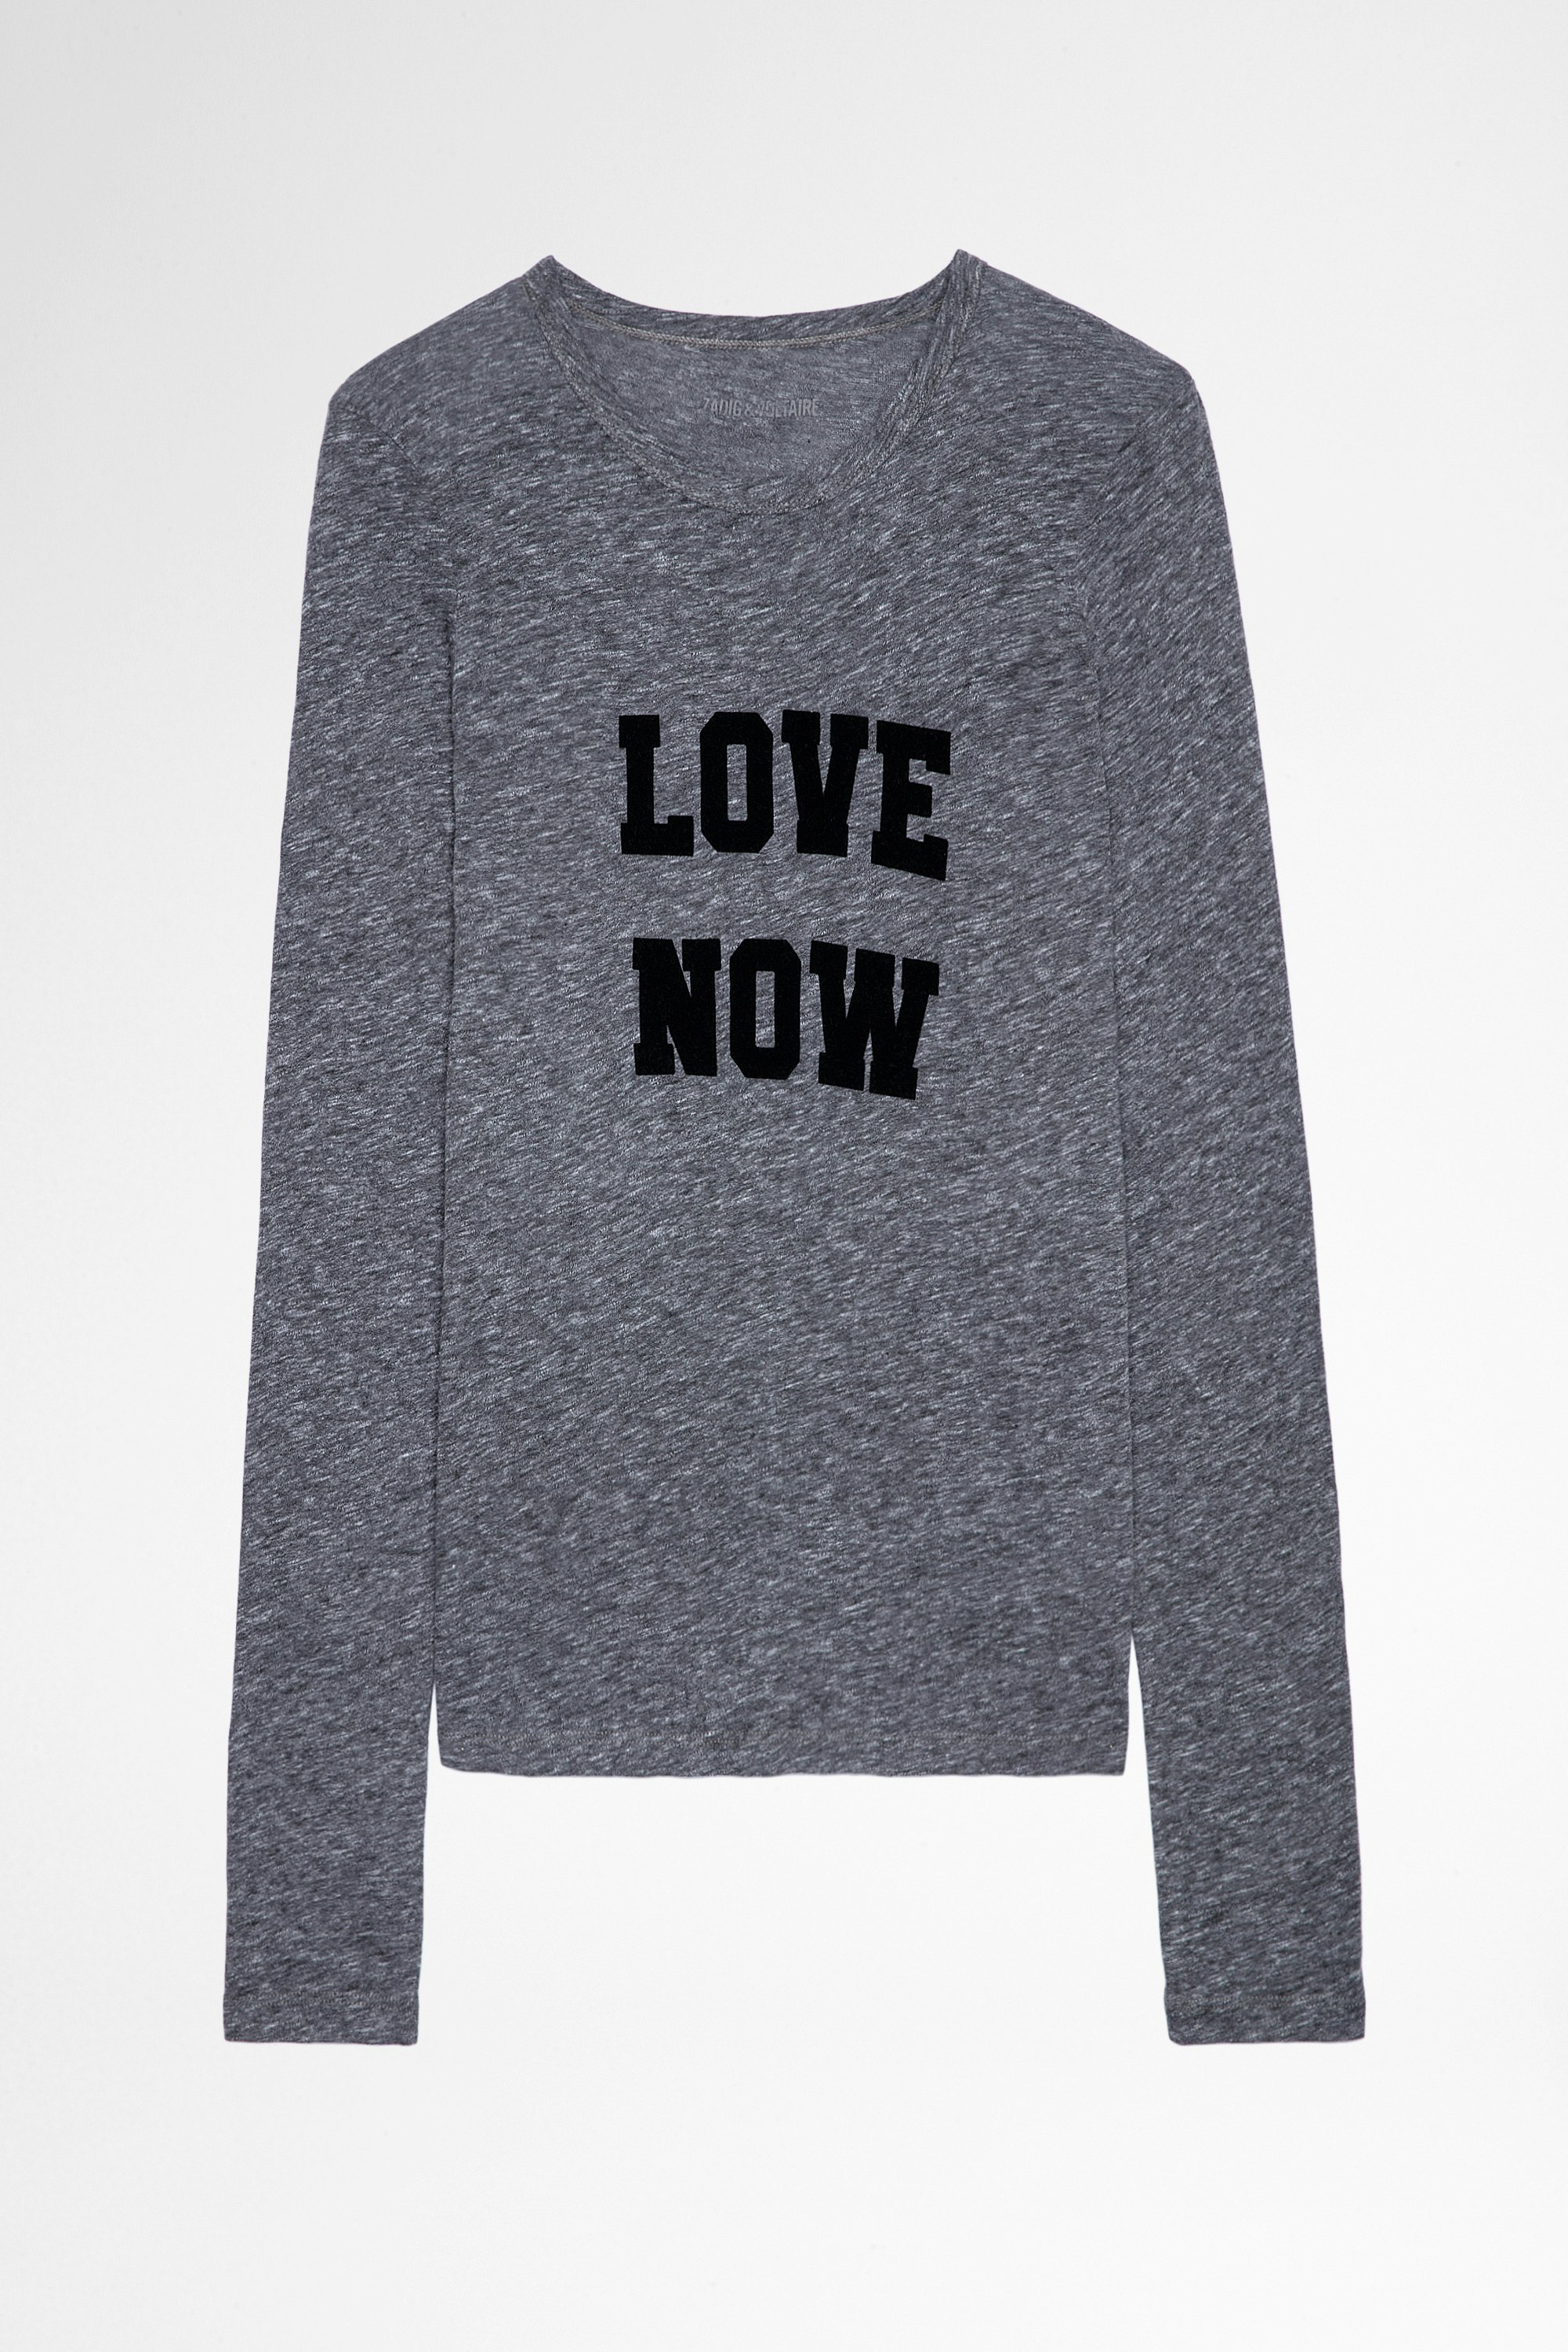 T-shirt Willy T-shirt grigia Love Now a maniche lunghe, donna